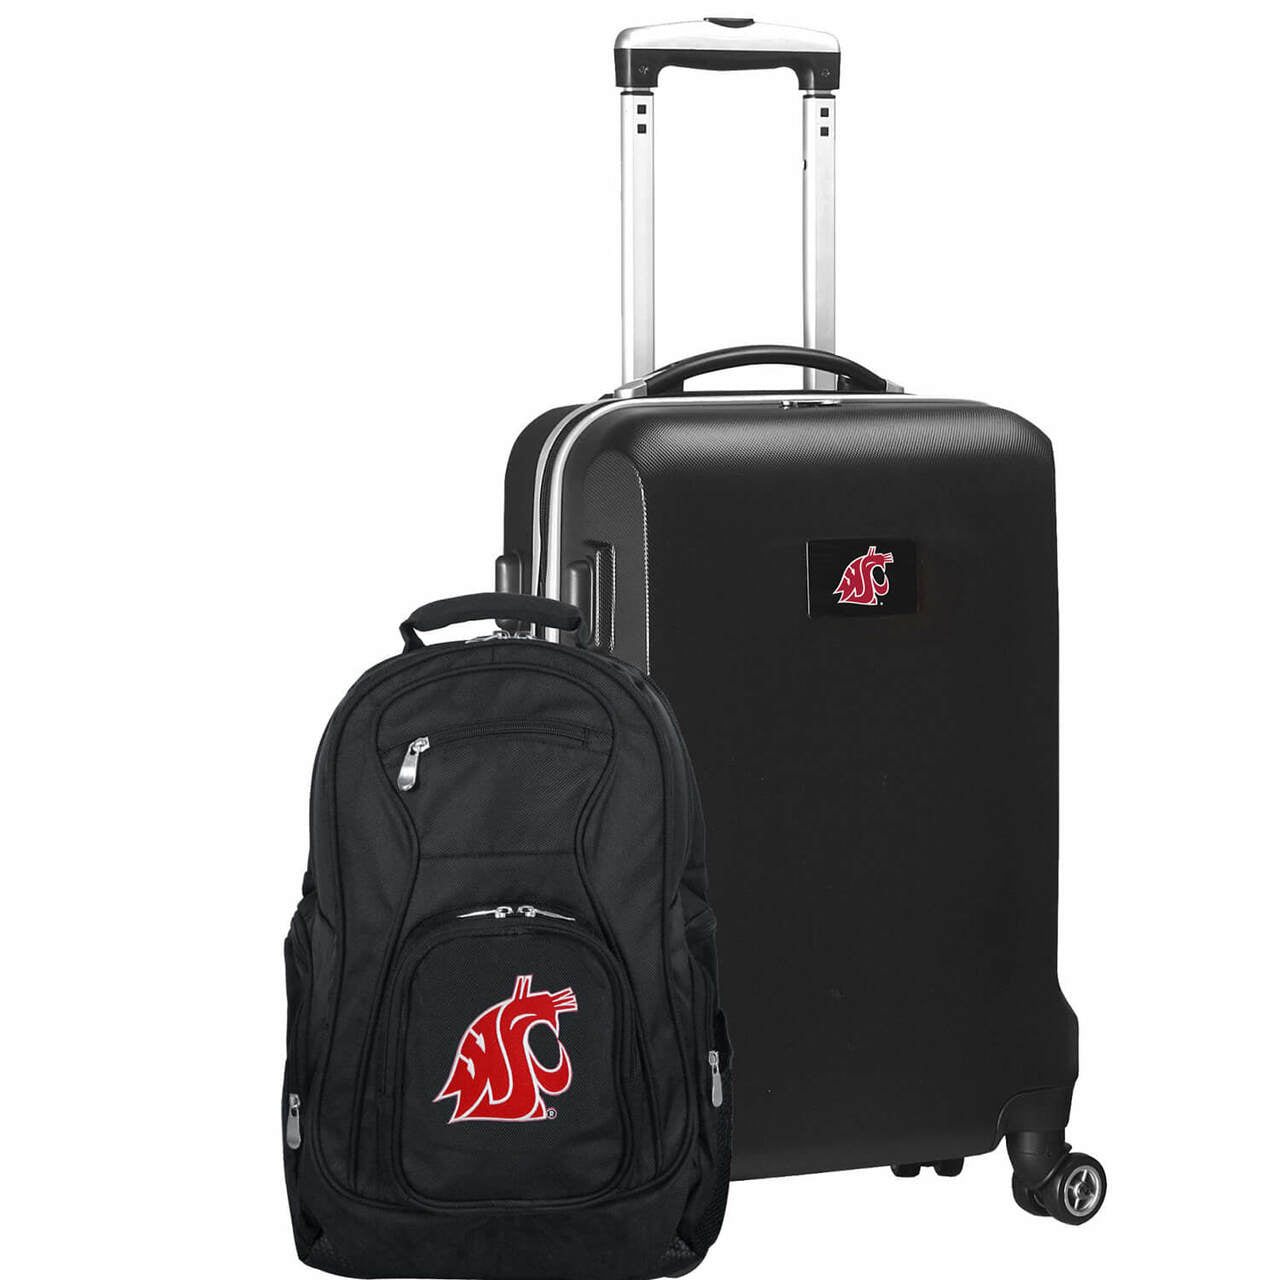 Washington State Cougars Deluxe 2-Piece Backpack and Carry-on Set in Black